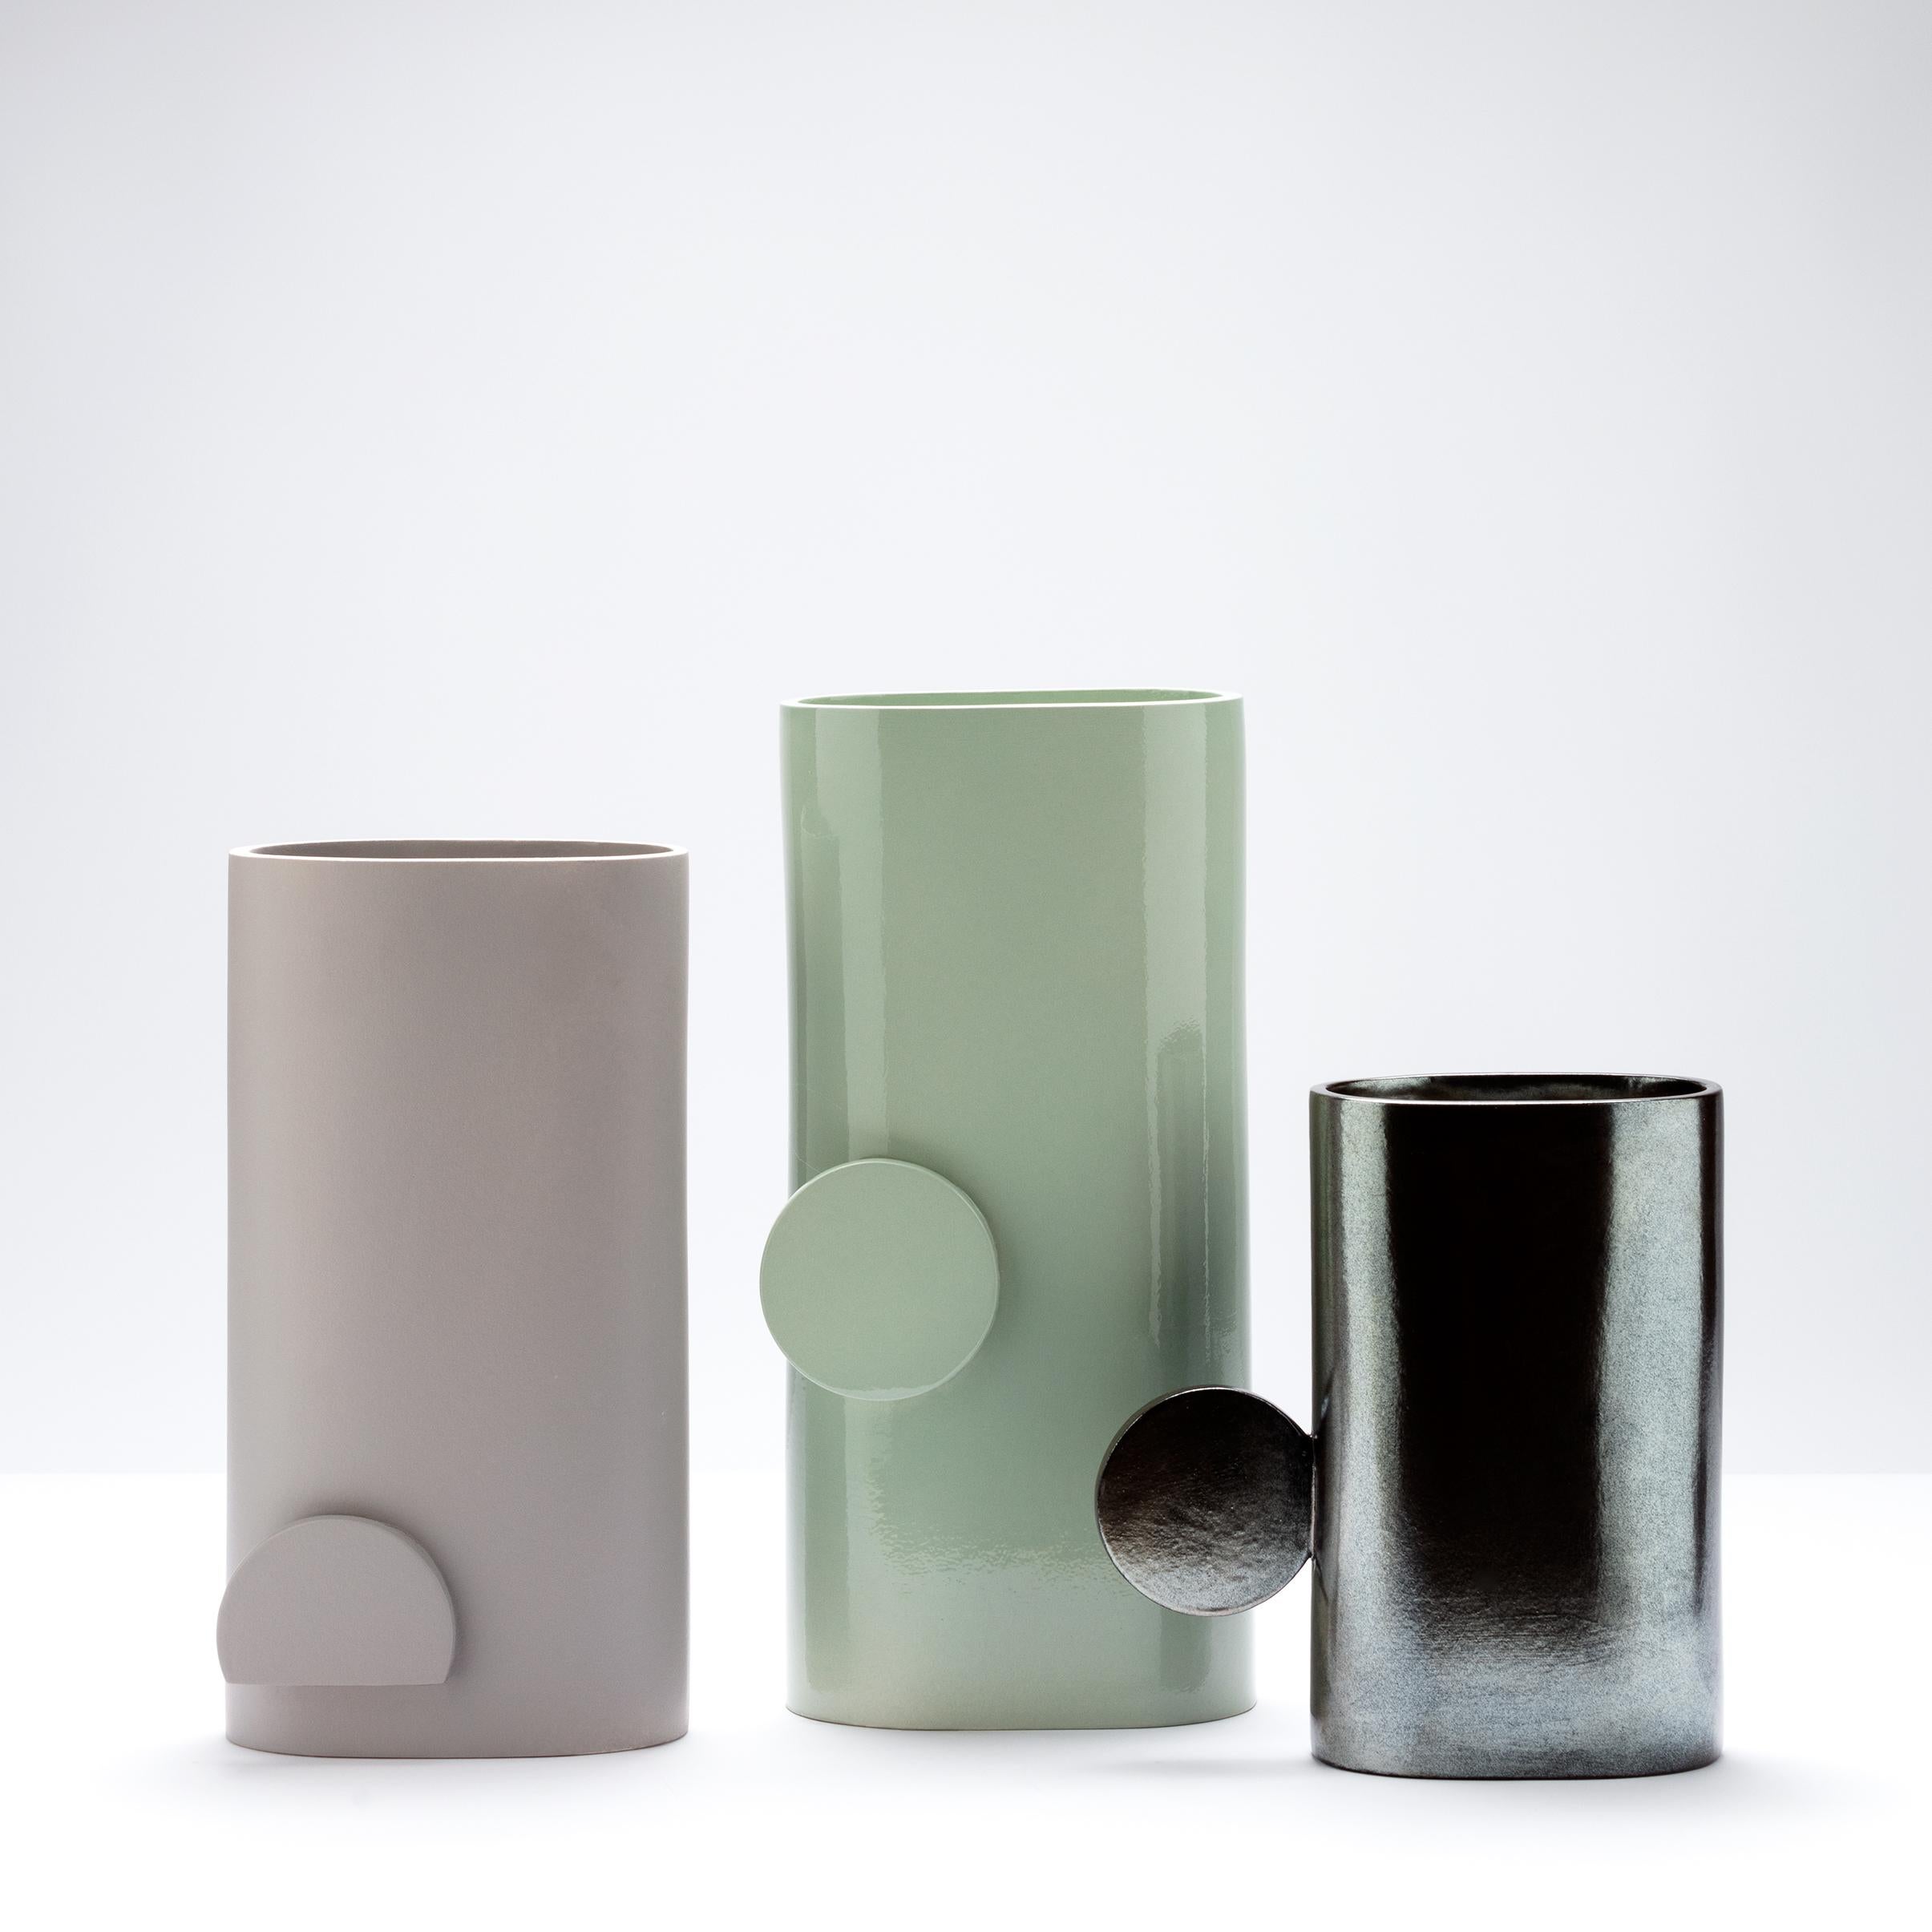 The Viola vase is part of an edition of three vases called Trio. The names were inspired by three musical instruments, Piano, Viola and Cello, thinking of the harmony created by the instruments playing together.
Here I propose the Purple vase in an